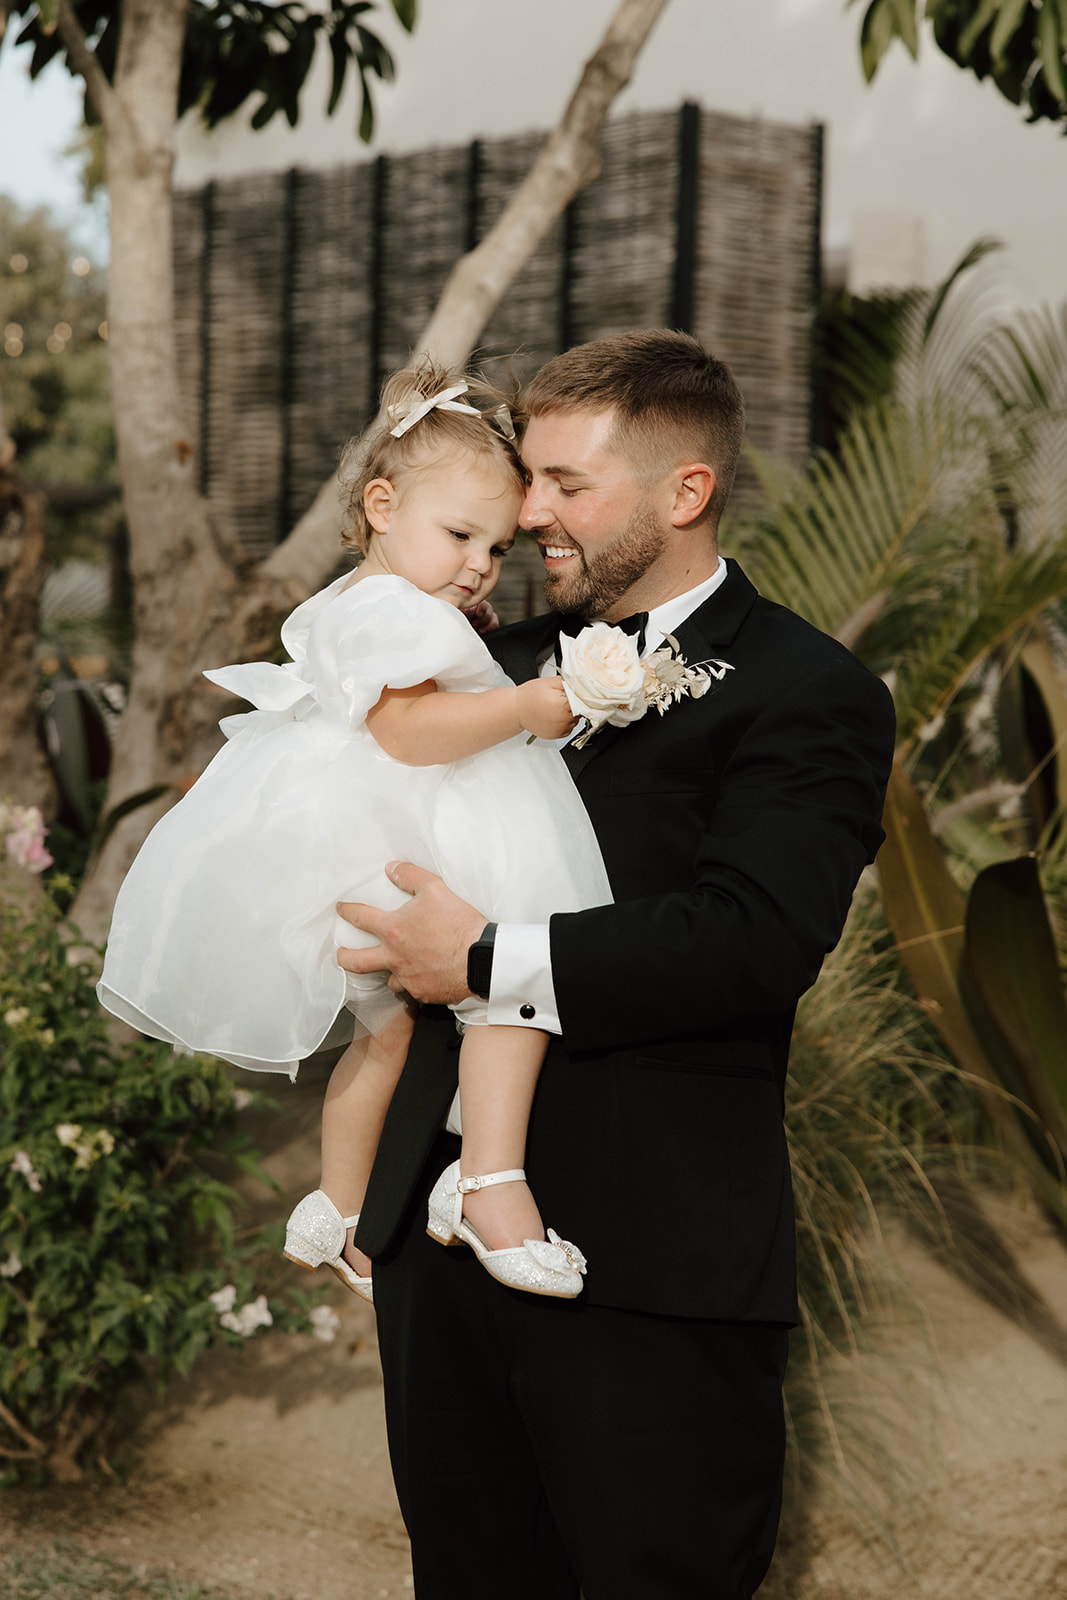 Groom in a black suit holding a smiling young girl in a white dress at a Cabo San Lucas wedding